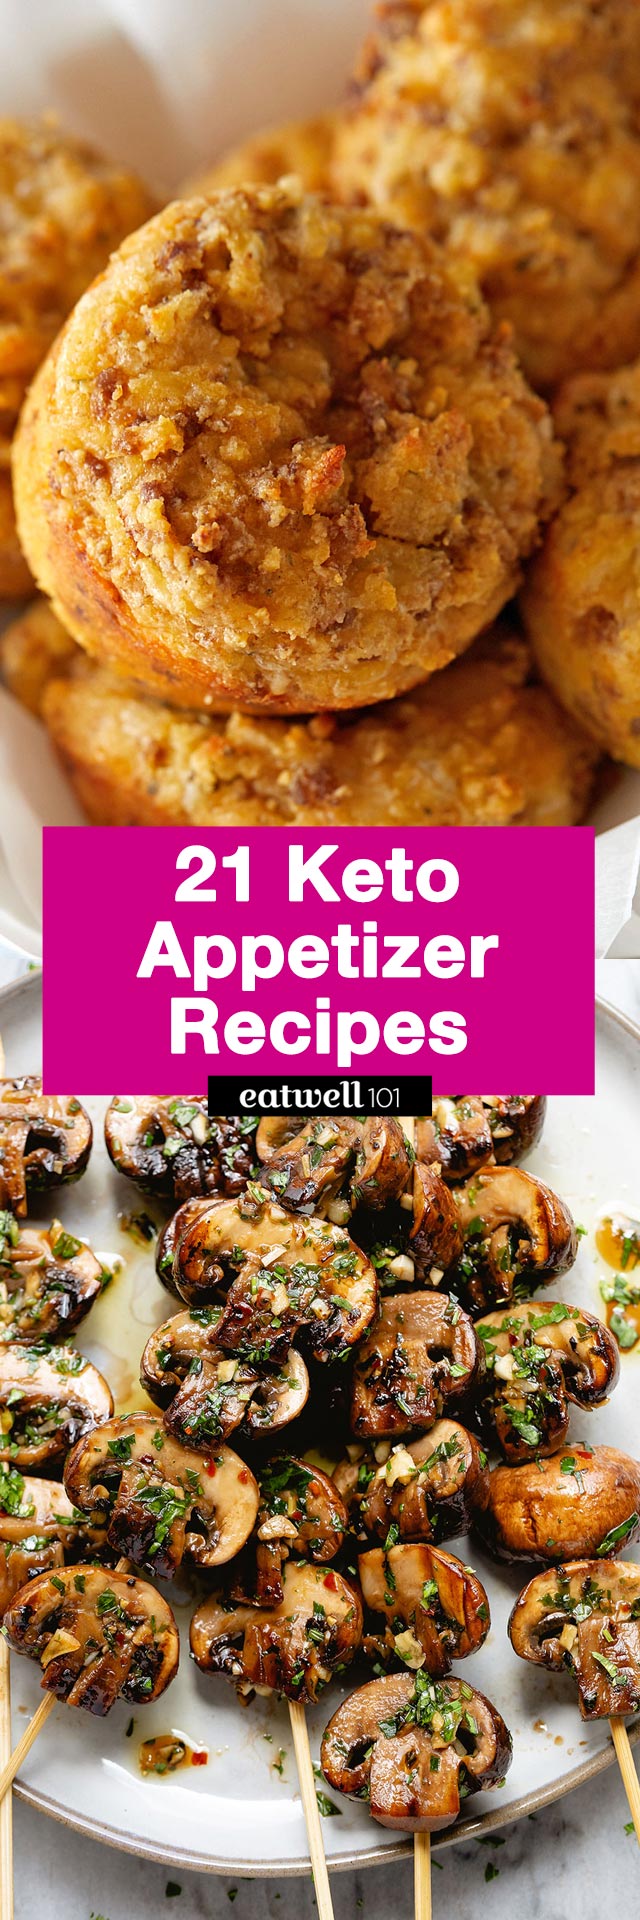 Keto appetizer recipes  - #keto #appetizers #ketodiet #eatwell101 #recipes - These Keto party appetizer recipes will have you ready to entertain like a pro while staying in ketosis!